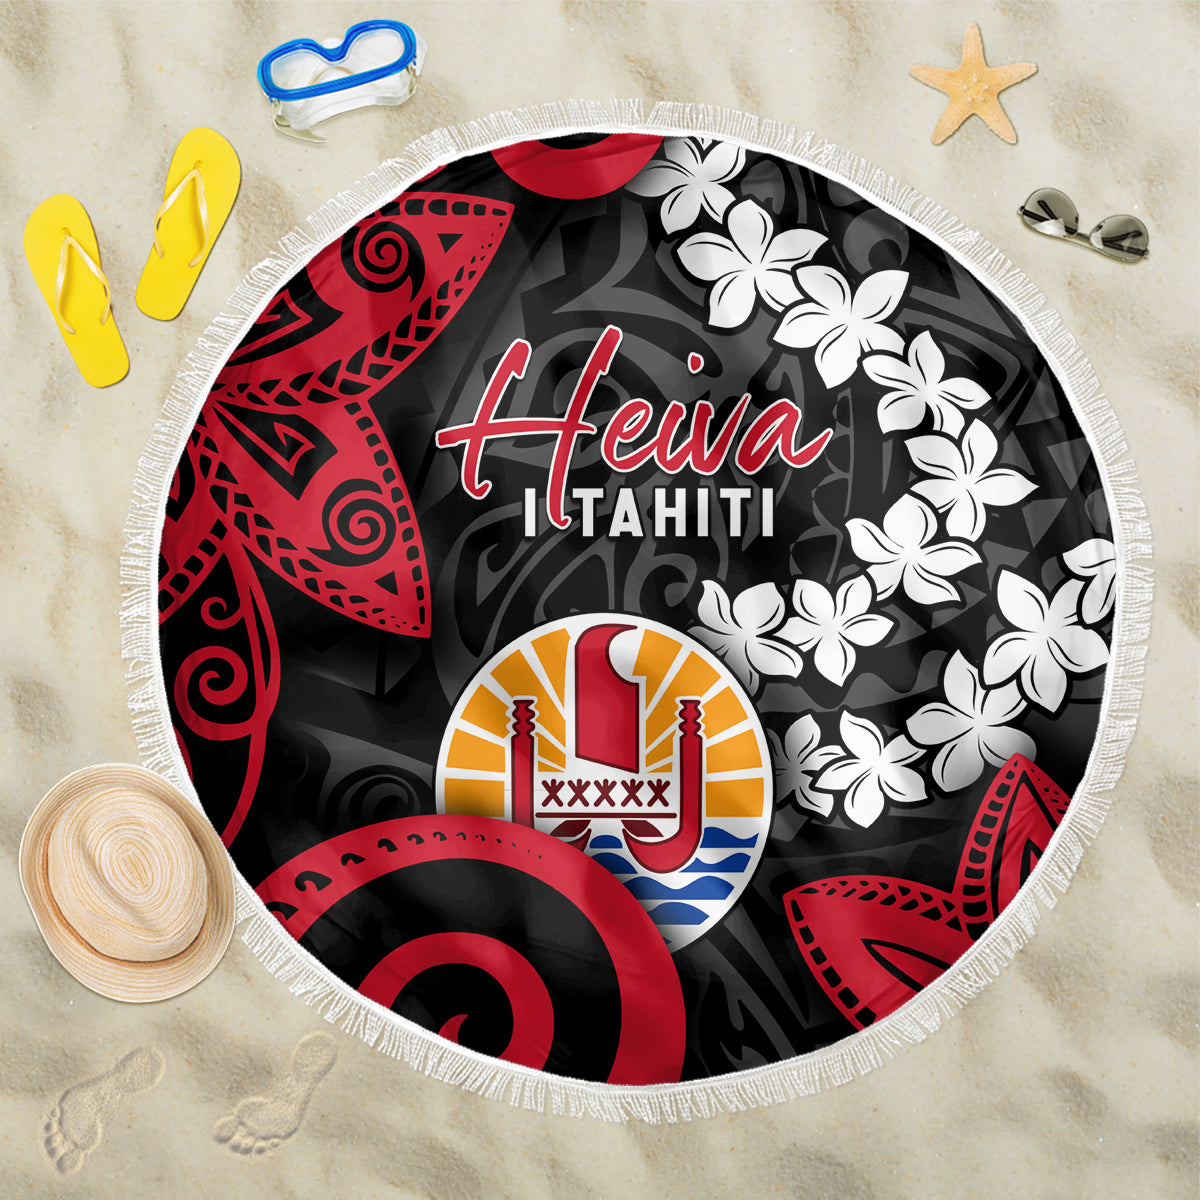 Tahiti Heiva Festival Beach Blanket Floral Pattern With Coat Of Arms